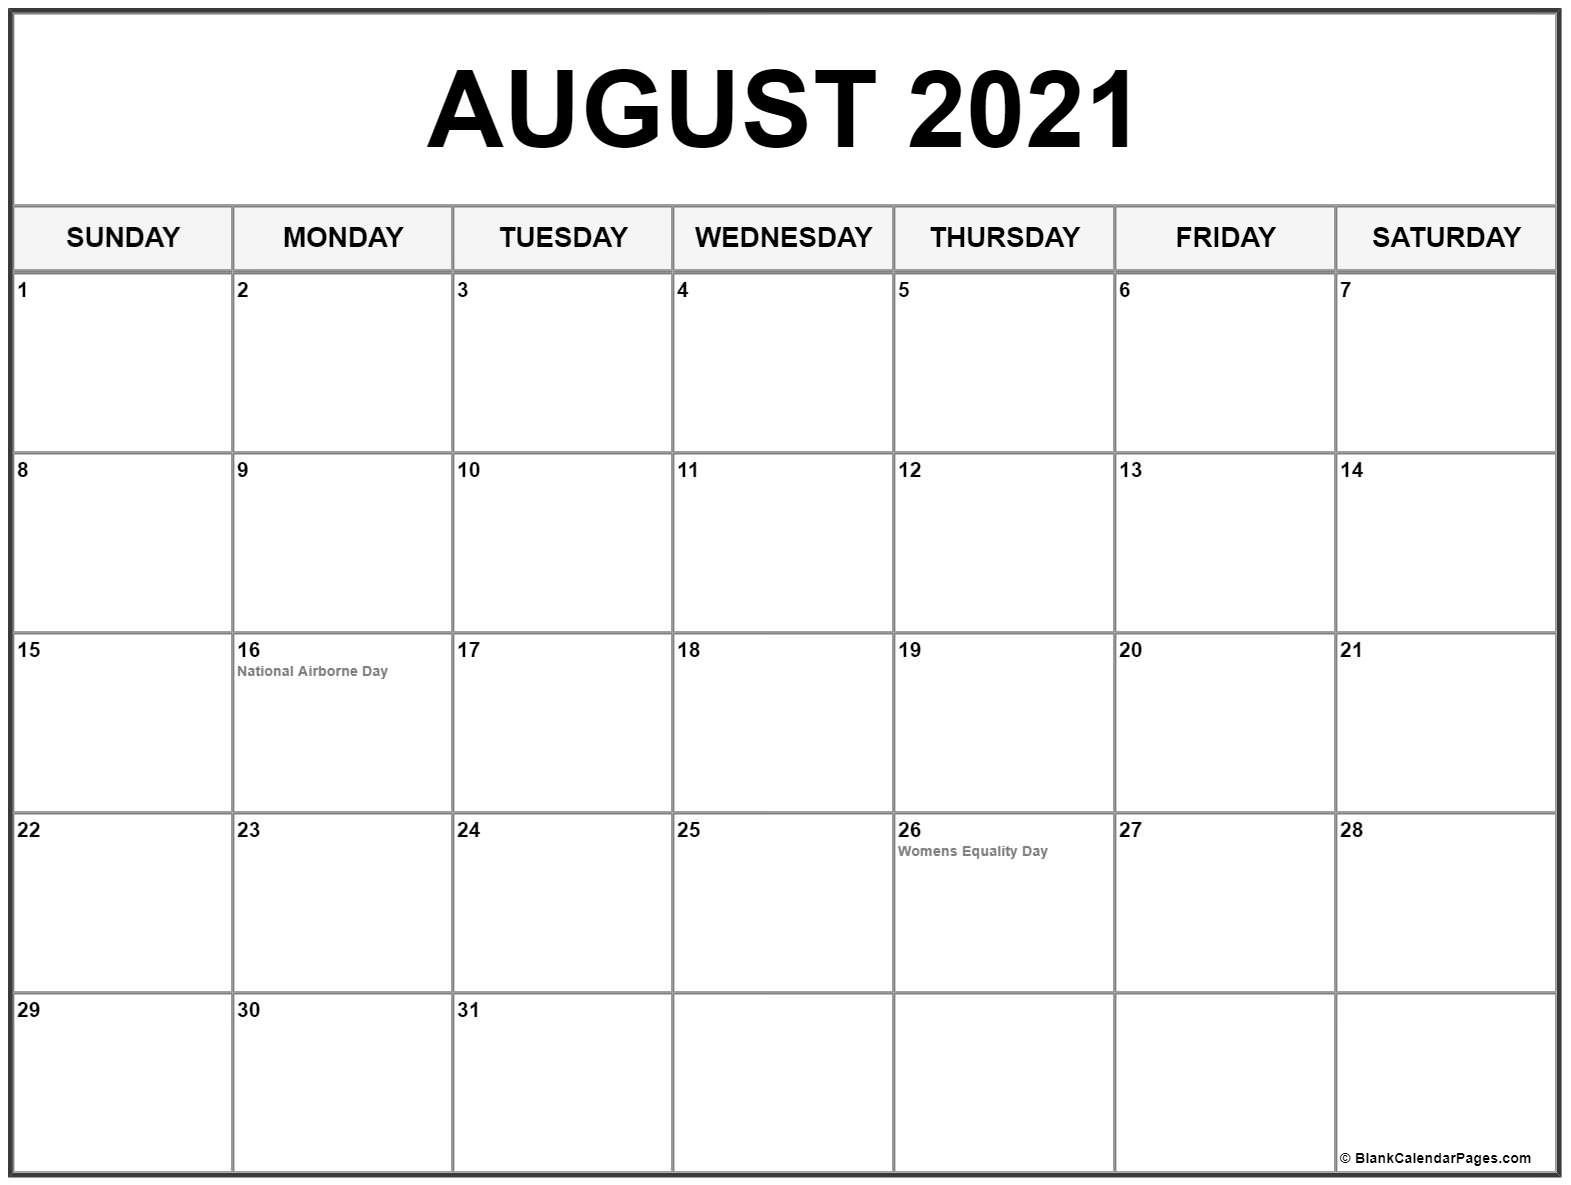 Collection Of August 2021 Calendars With Holidays Us Calendar Holidays 2021